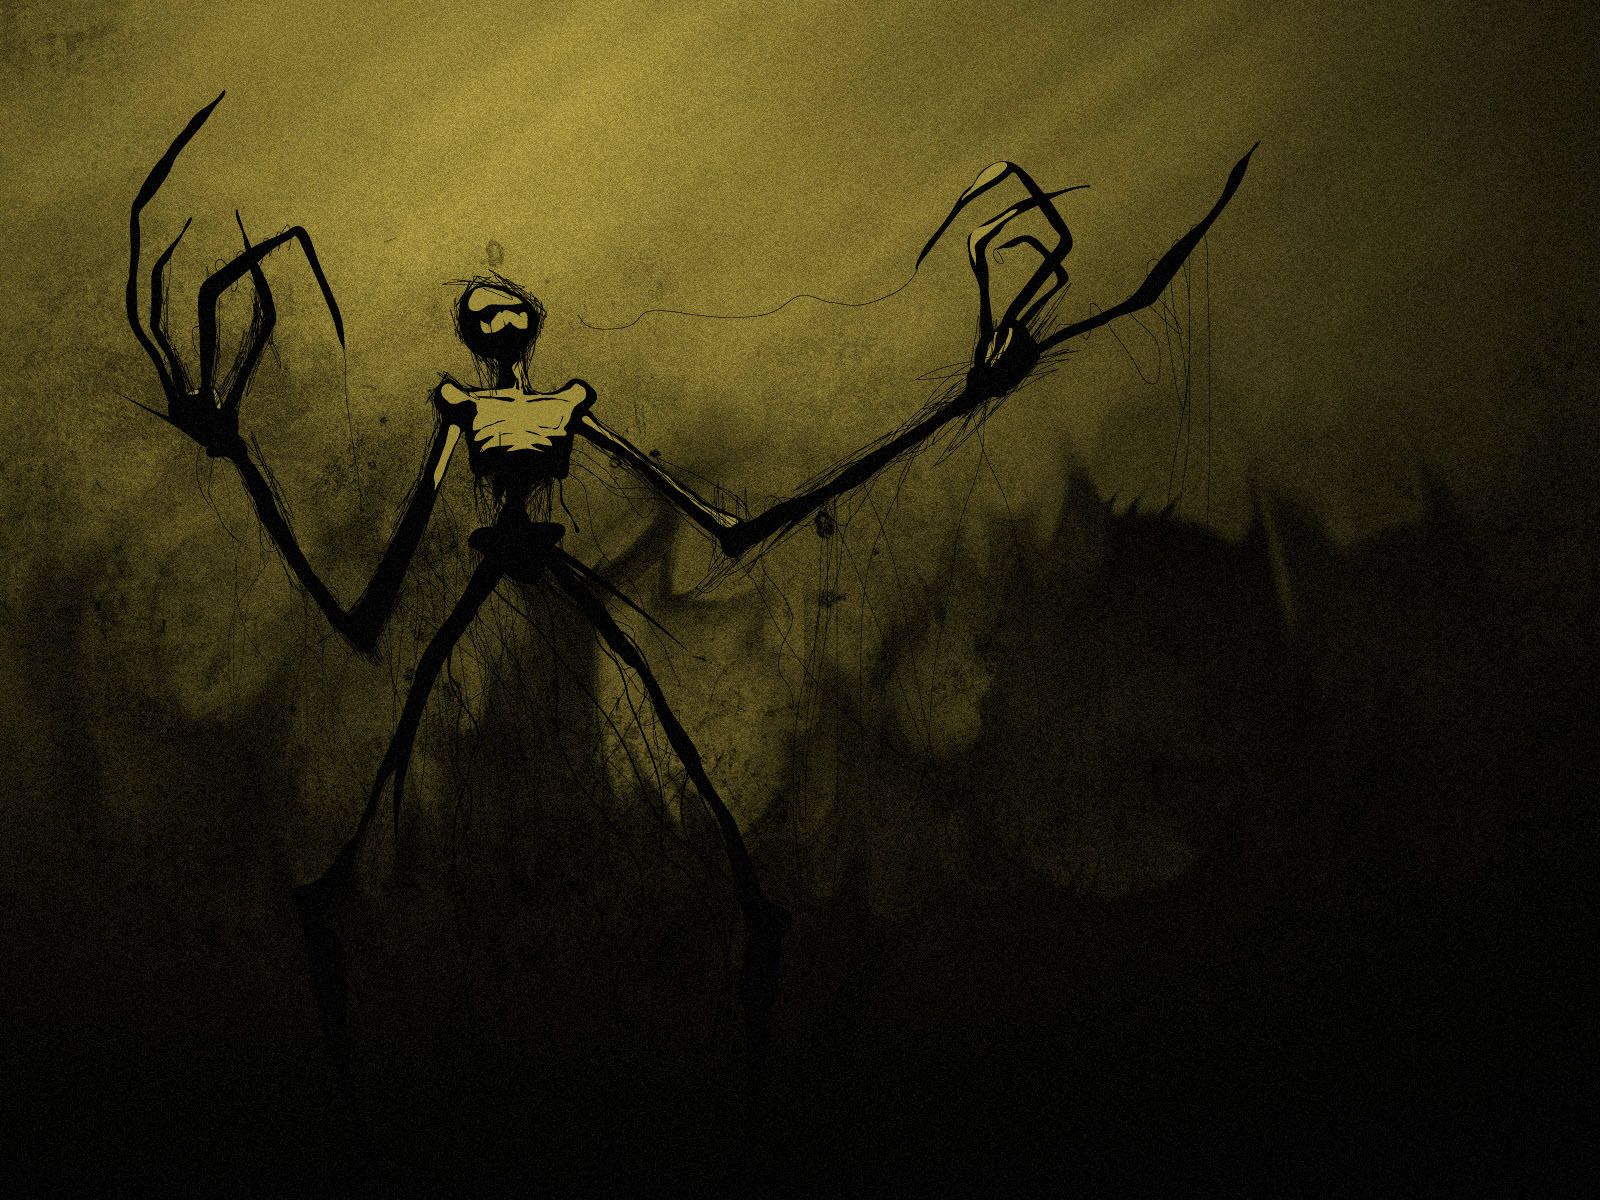 Scary monster wallpaper thin with long arms in the darkness. Creepy background, Gothic artwork, Gothic wallpaper